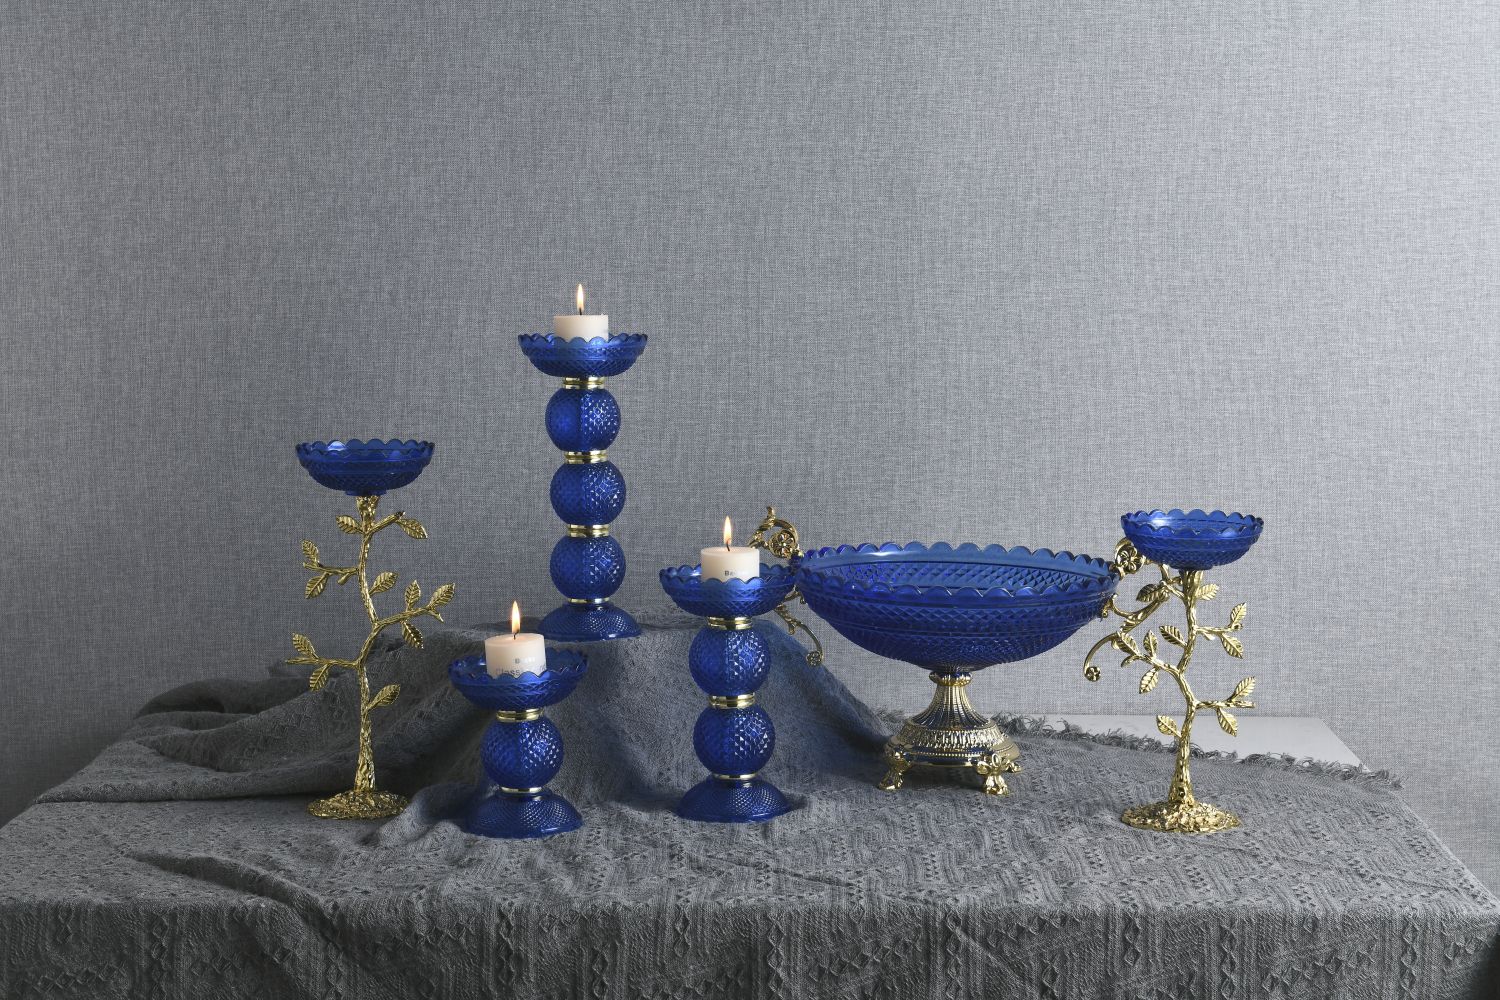 Luxury under the Blue Candlelight, Art of Interplay between Light and Shadow